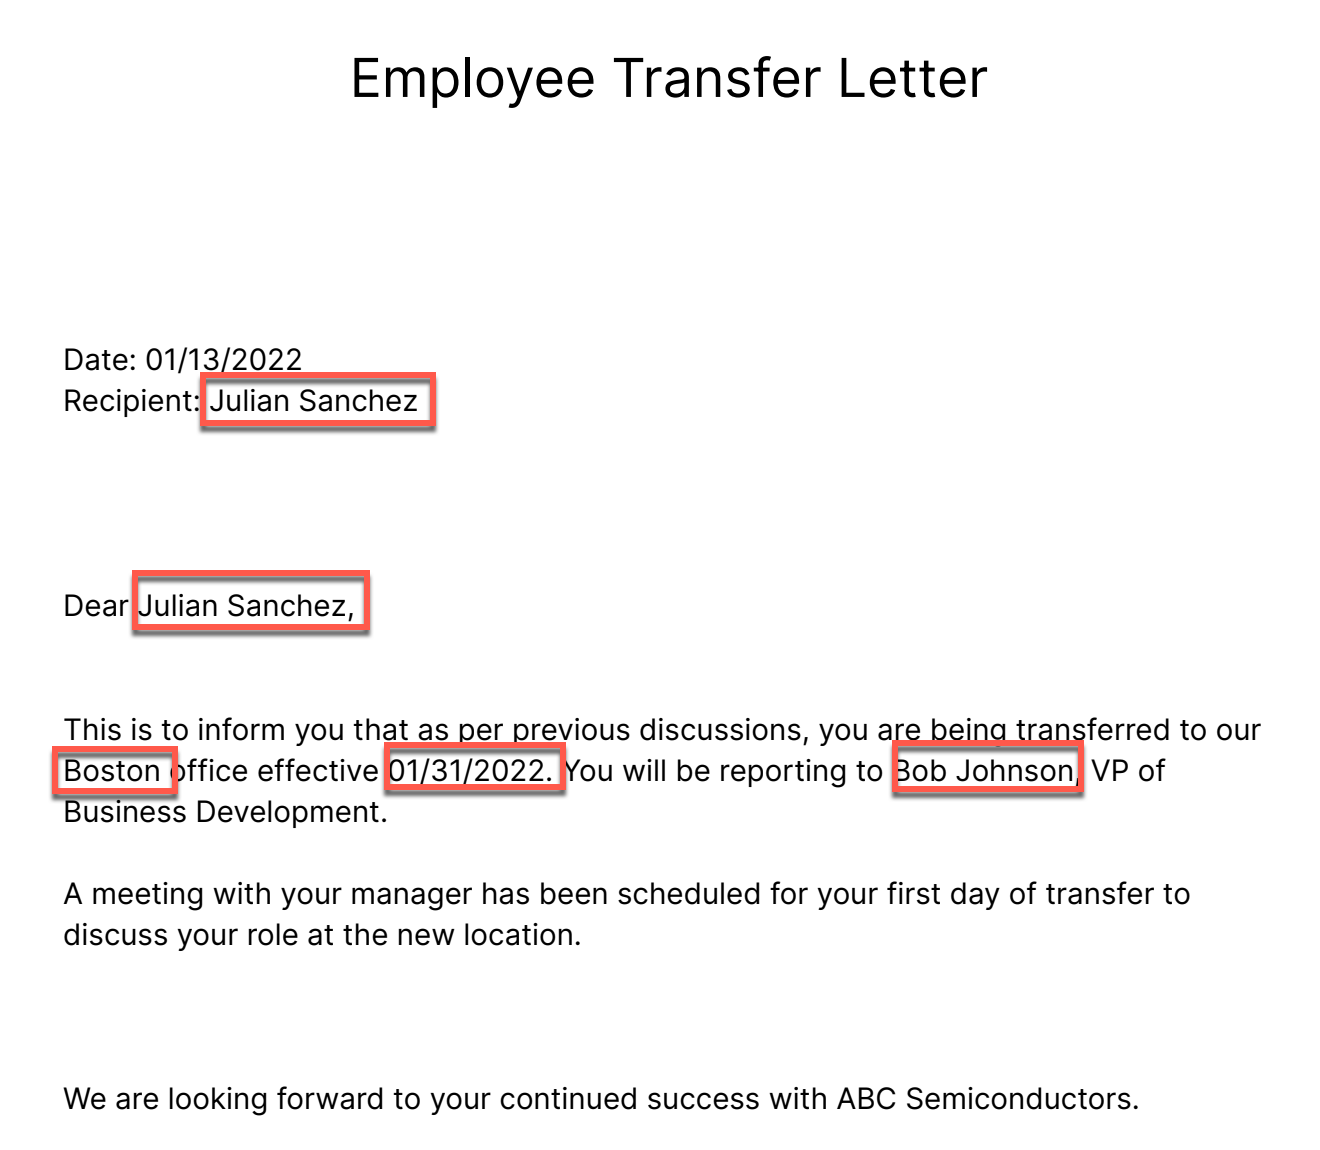 10-employee-transfer-letter-when-you-select-transfer.png